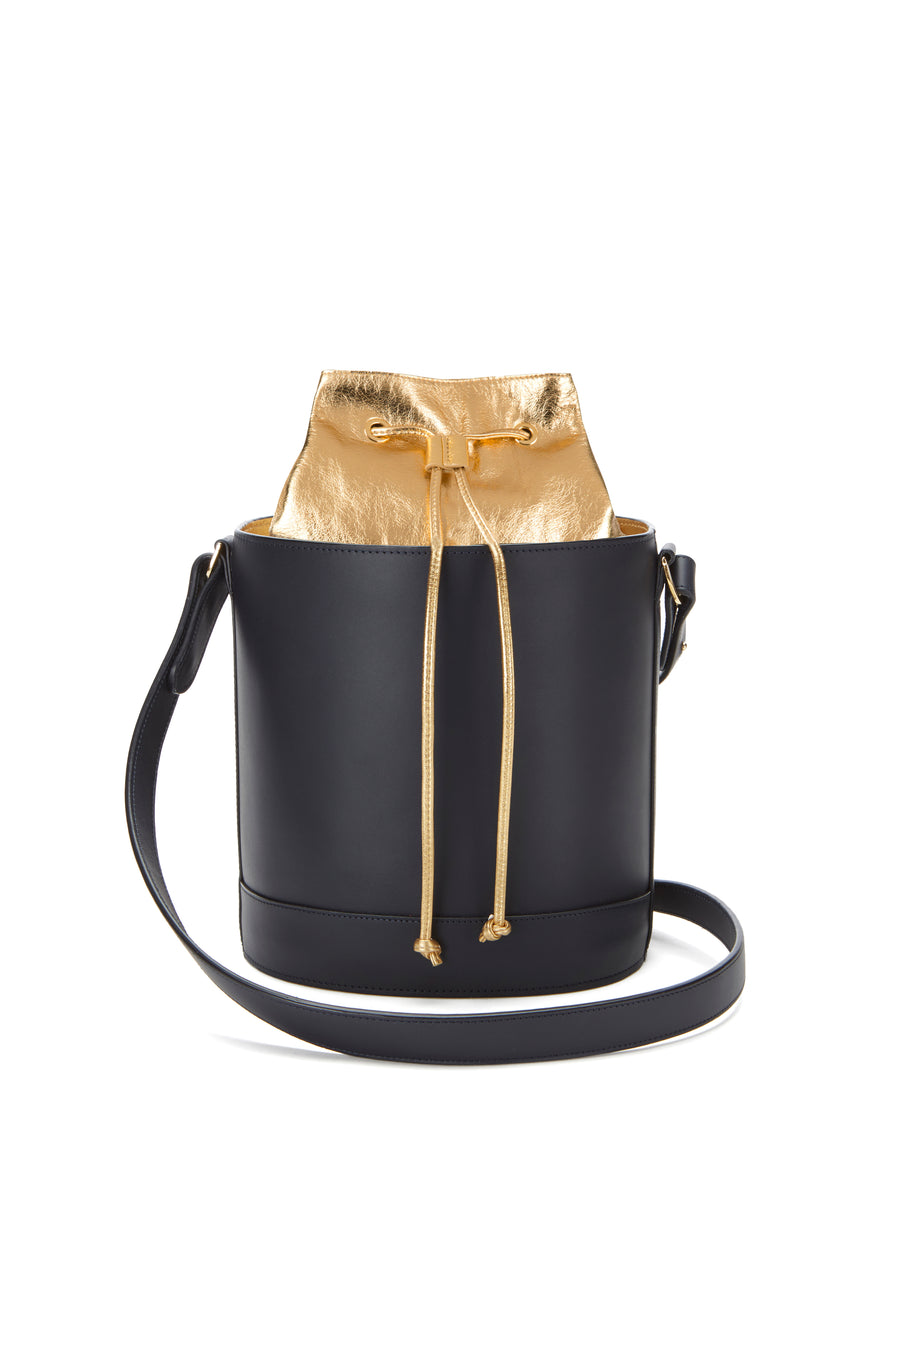 Bucket Bag in Navy and Gold